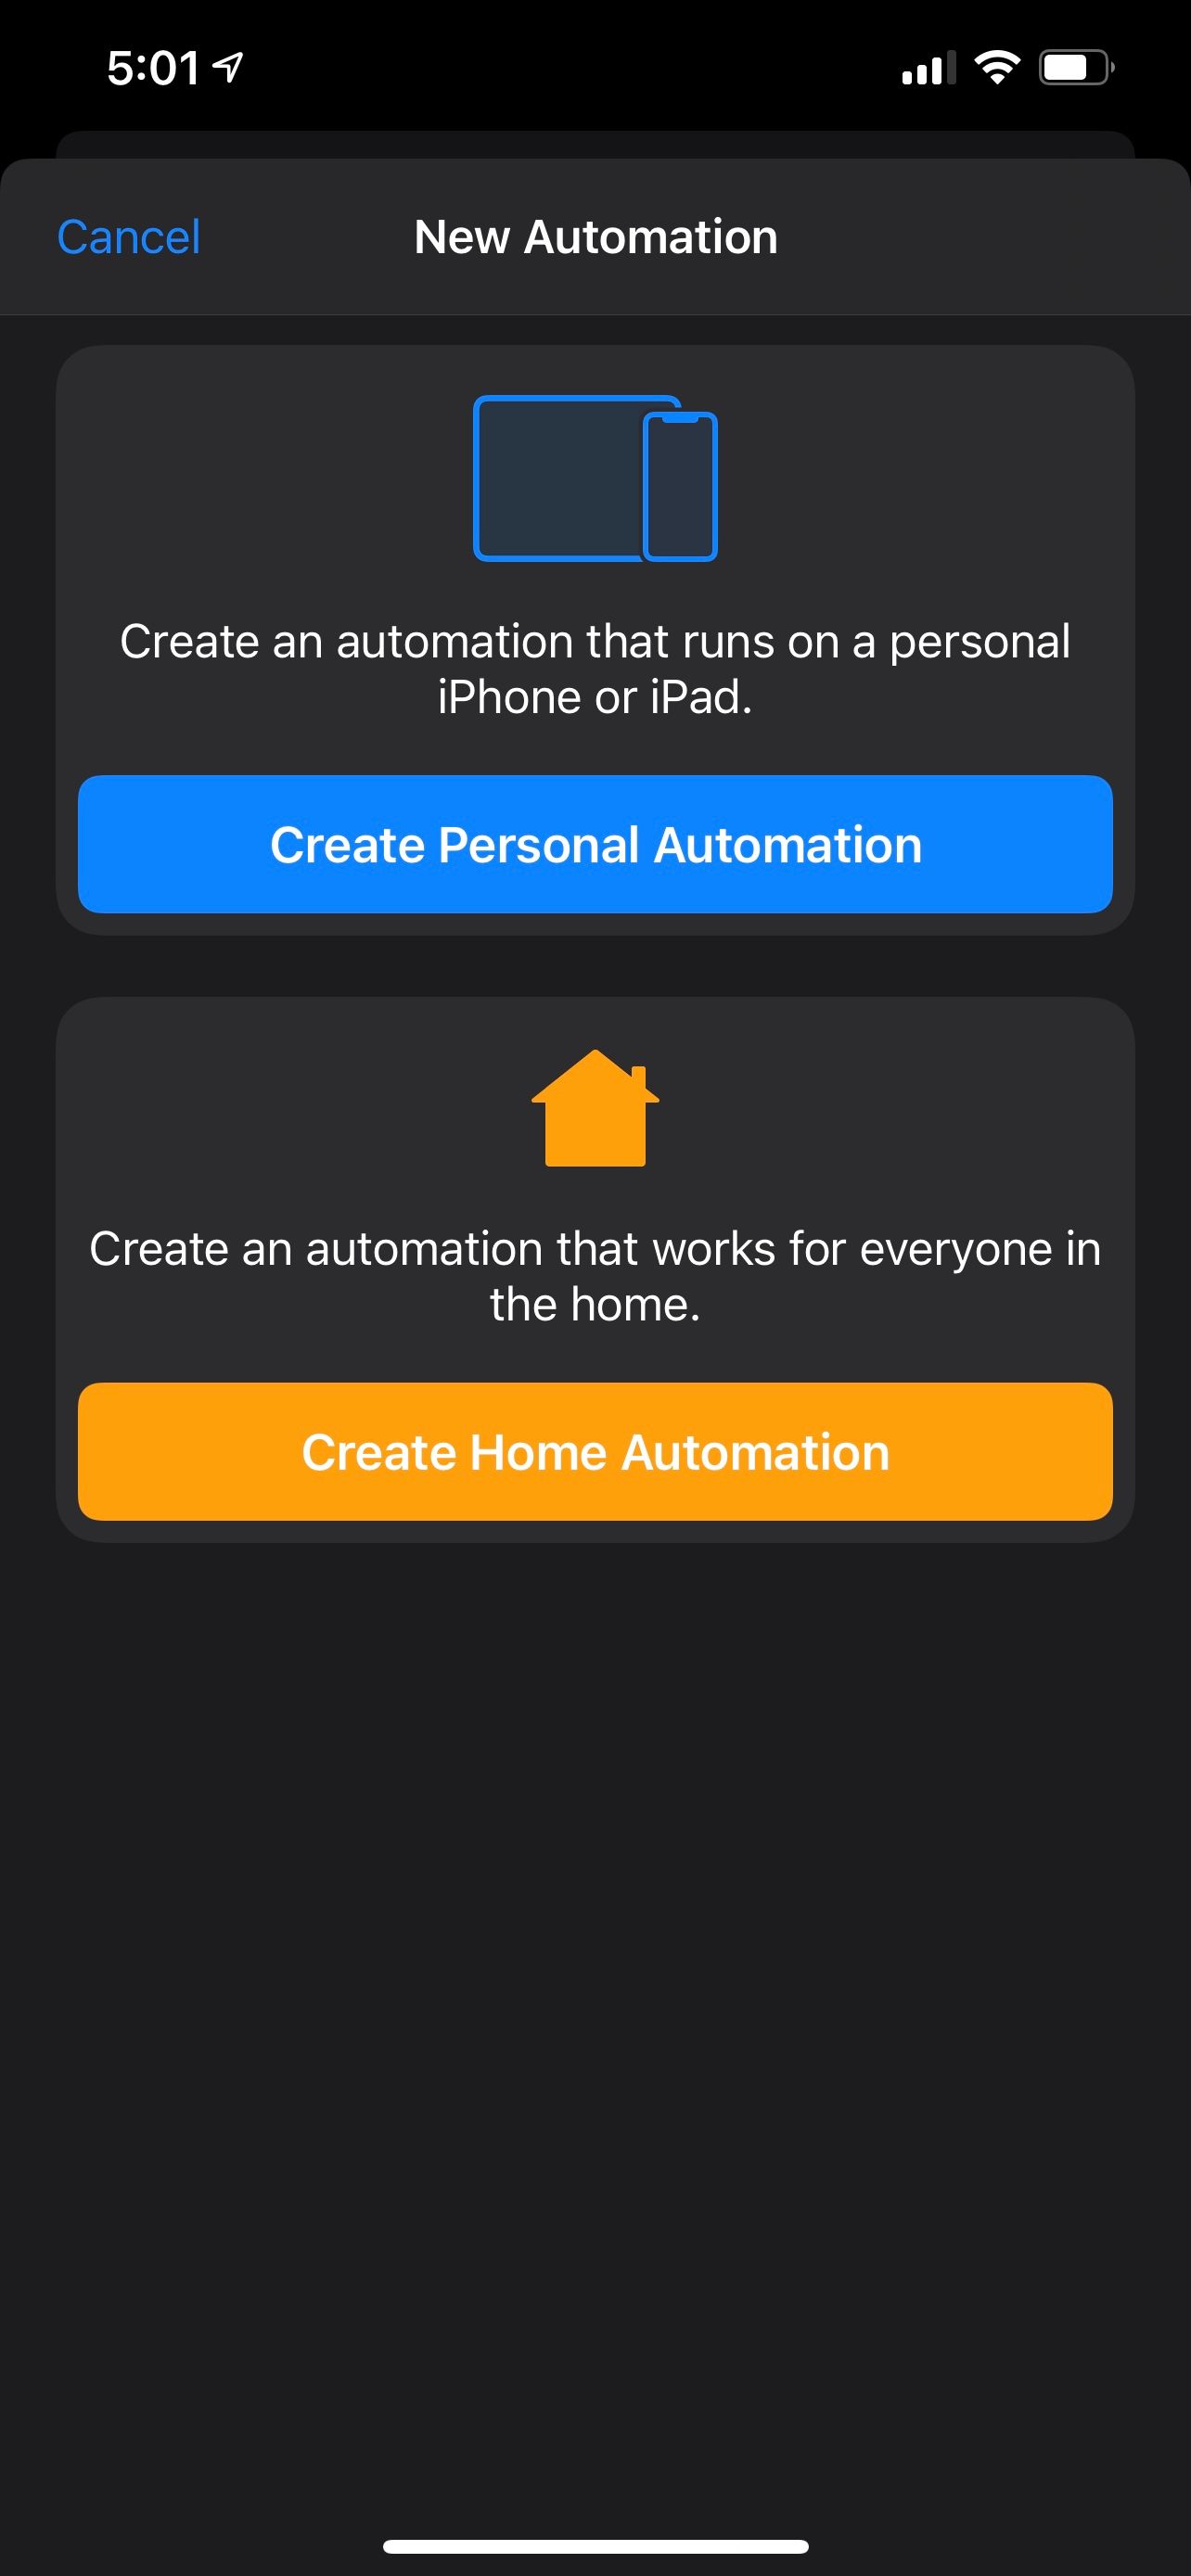 Personal or home automation choice